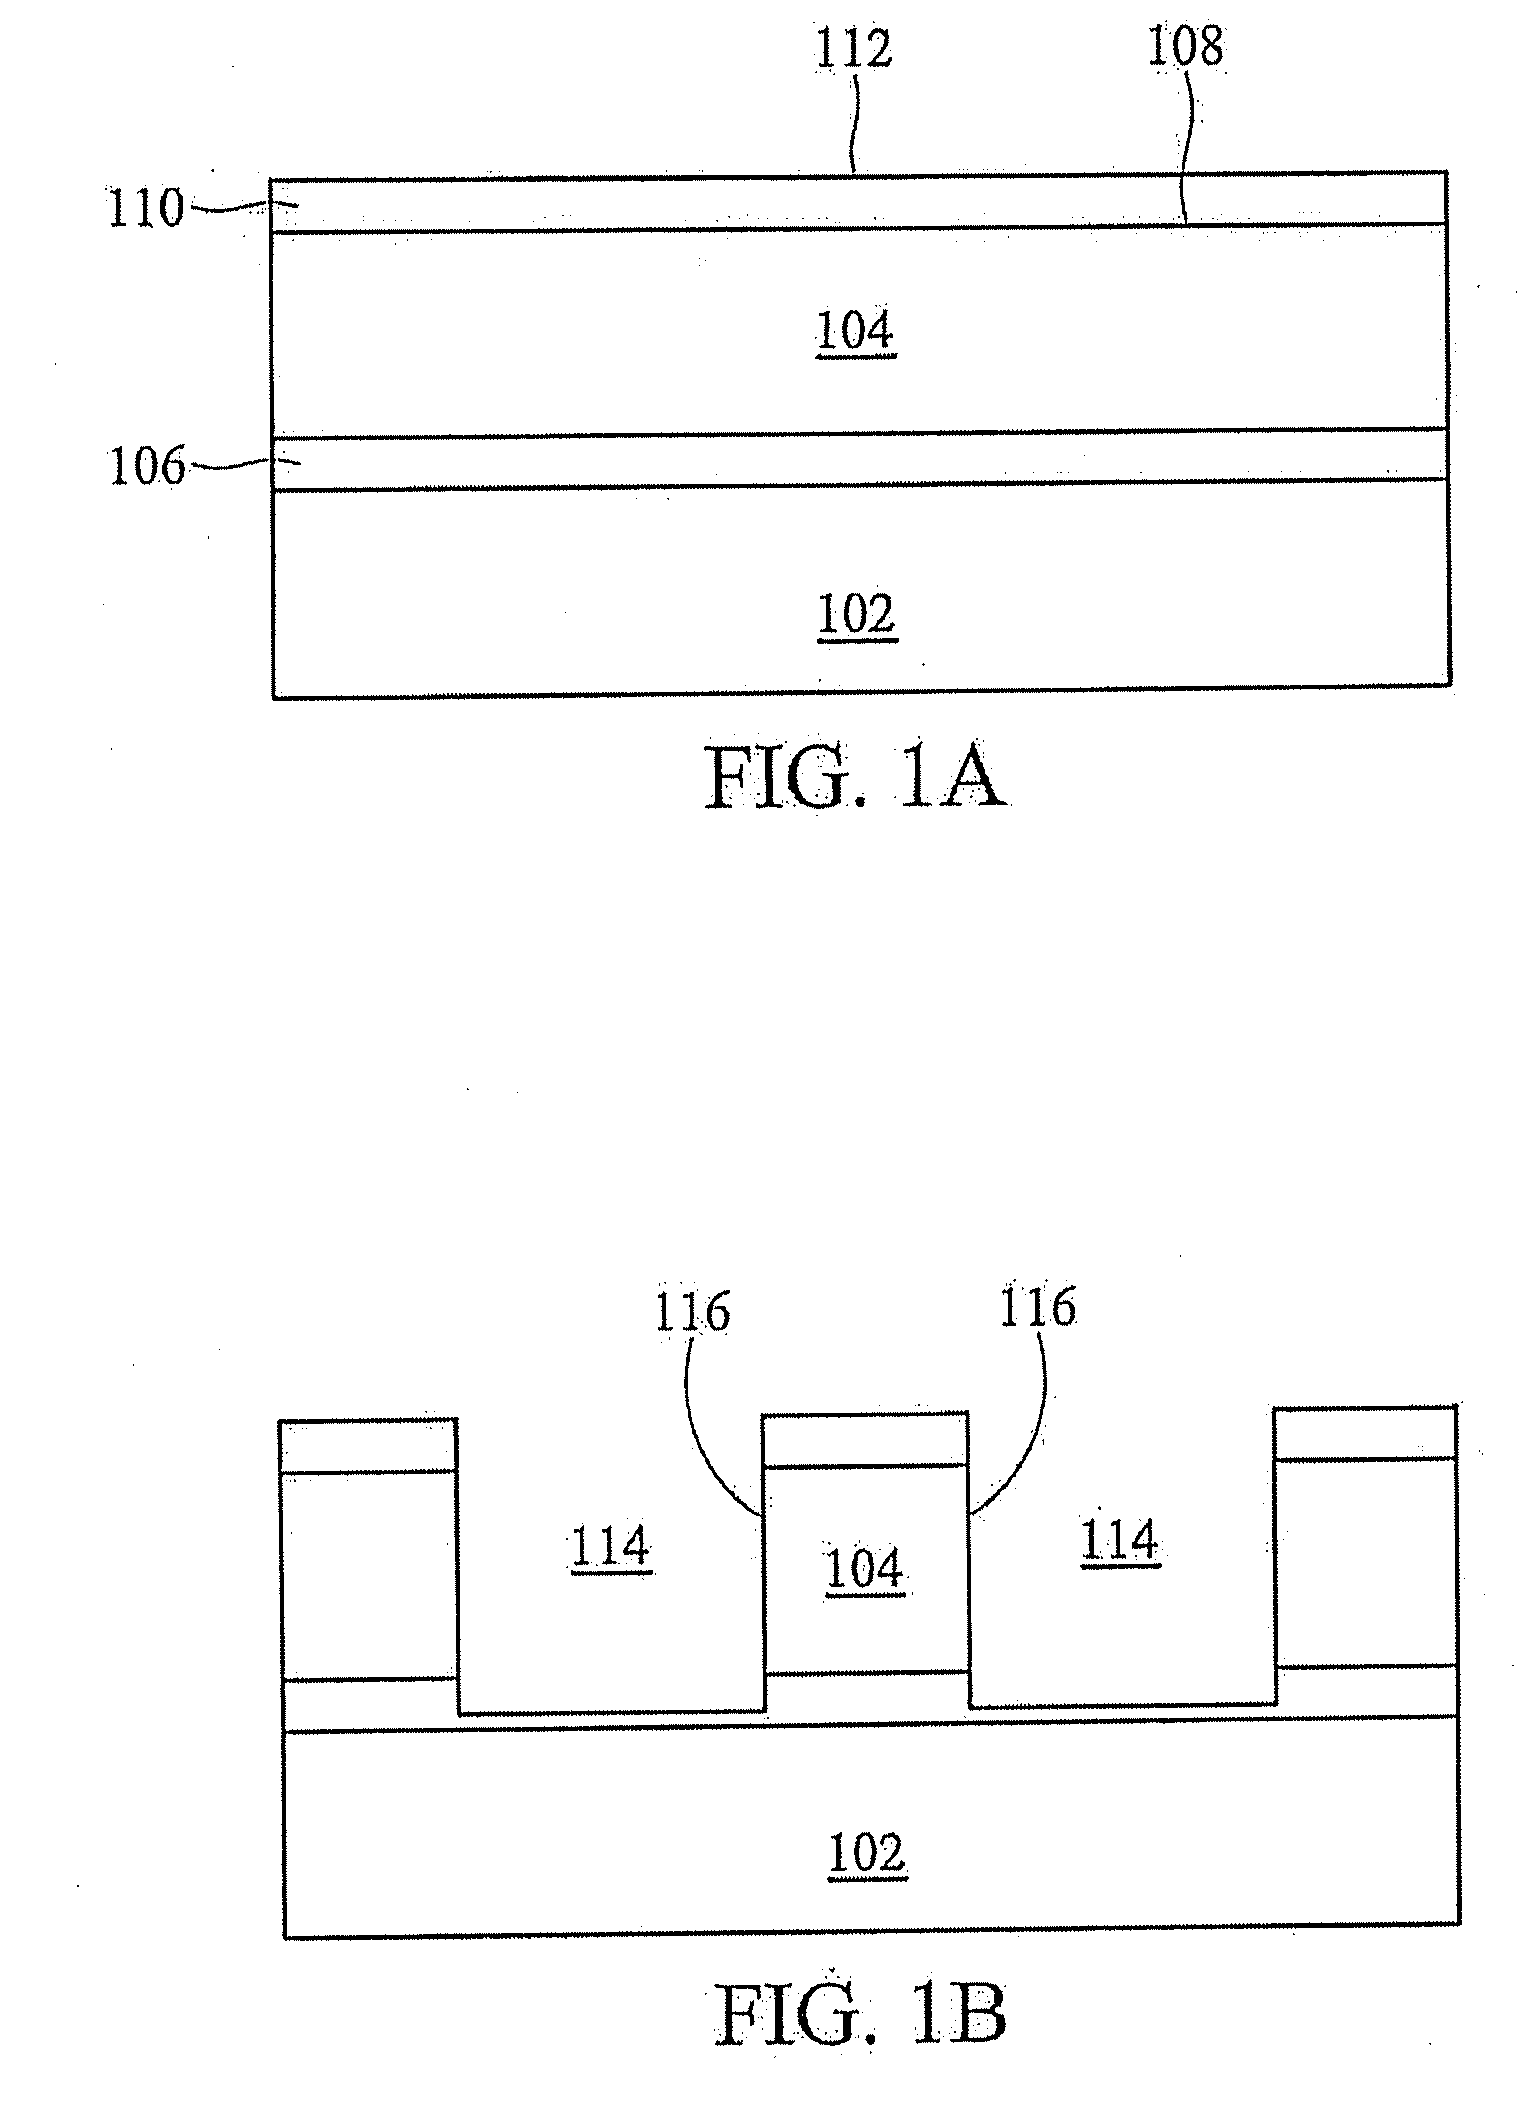 Air gap structure design for advanced integrated circuit technology